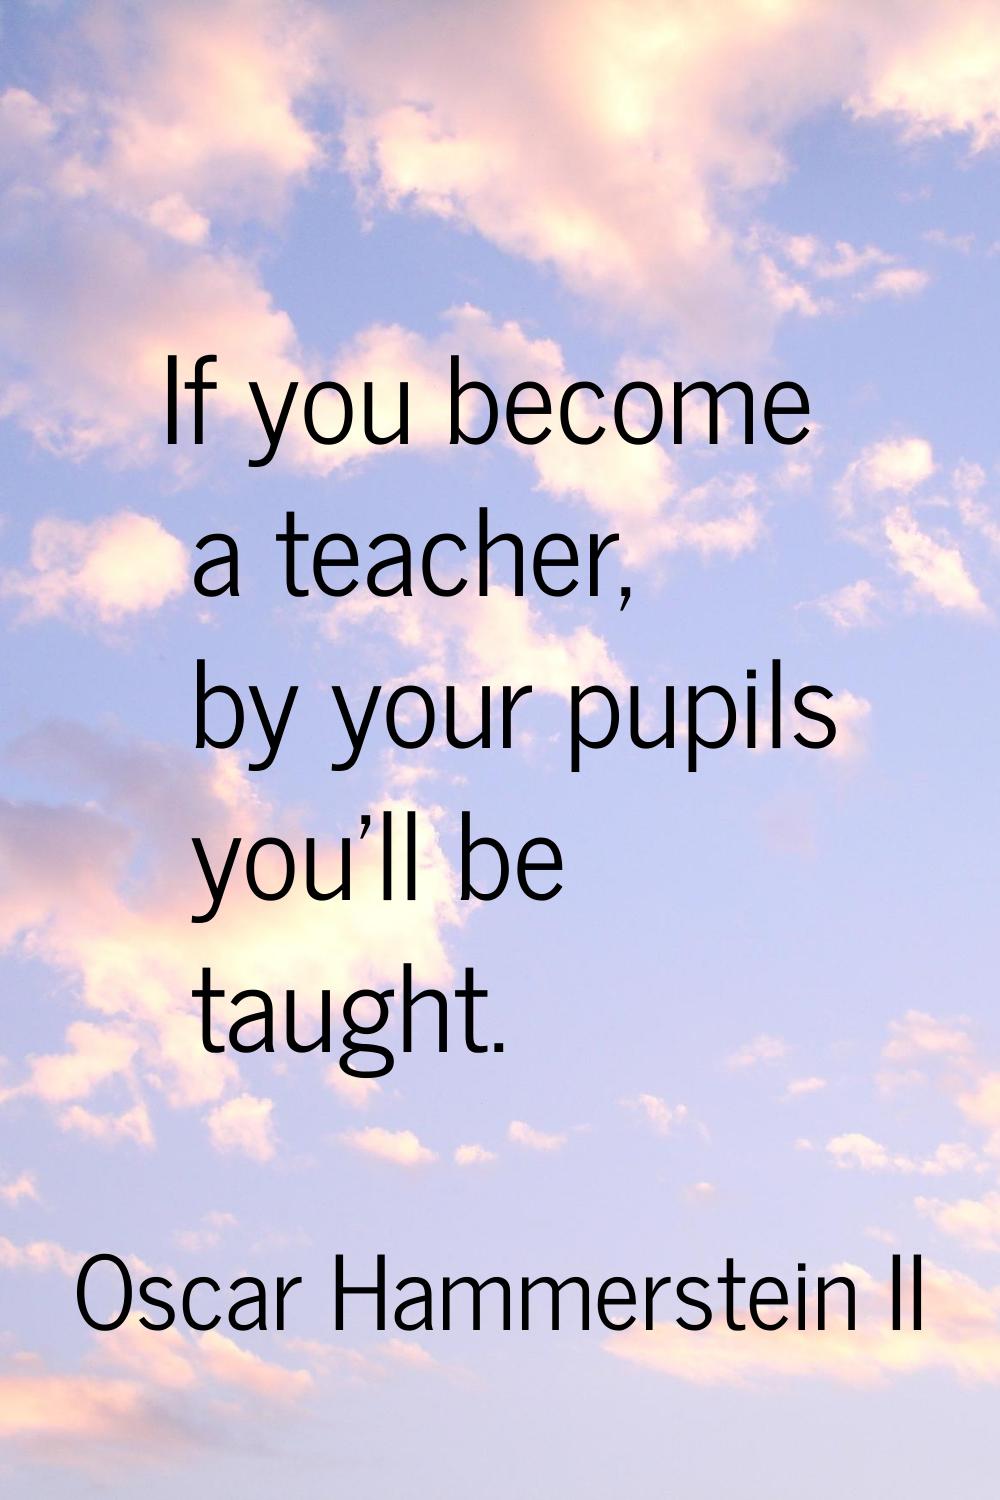 If you become a teacher, by your pupils you'll be taught.